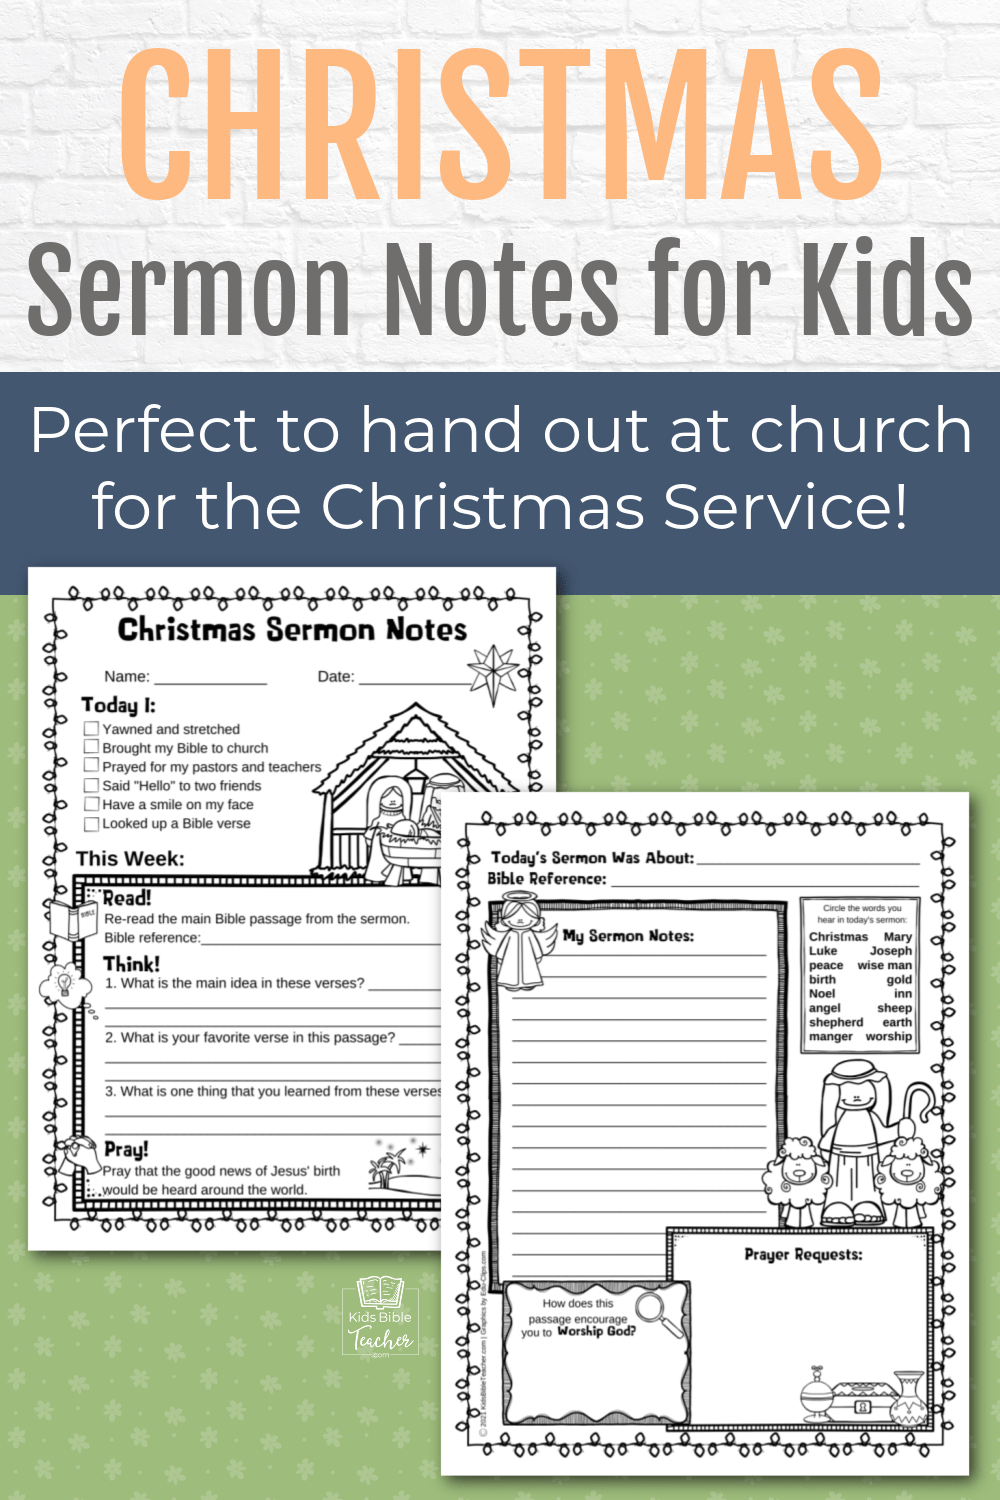 Welcome kids into your Christmas service with these fun Christmas Sermon Notes - Free Printable pages for family, church, or classroom use!